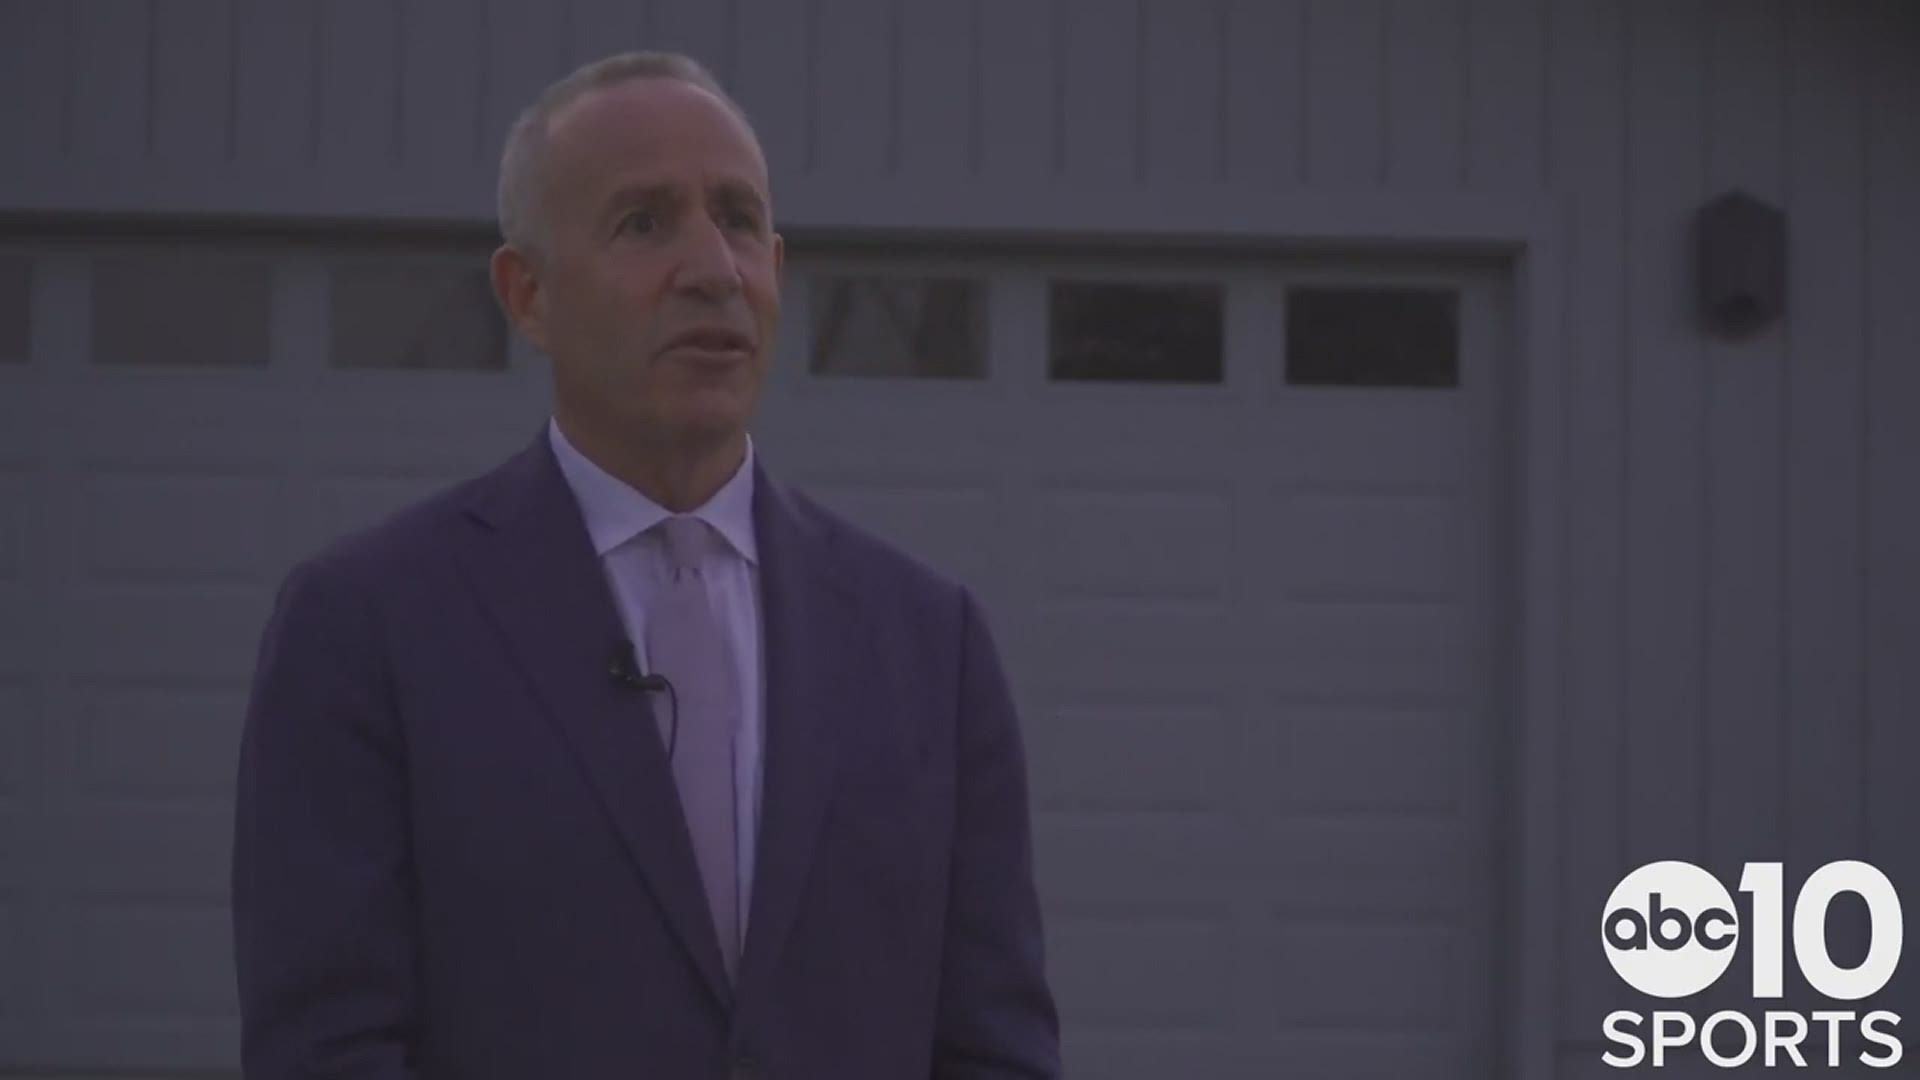 Sacramento Mayor Darrell Steinberg discusses why he's optimistic after Ron Burkle pulls out as Major League Soccer lead investor and the search for a replacement.